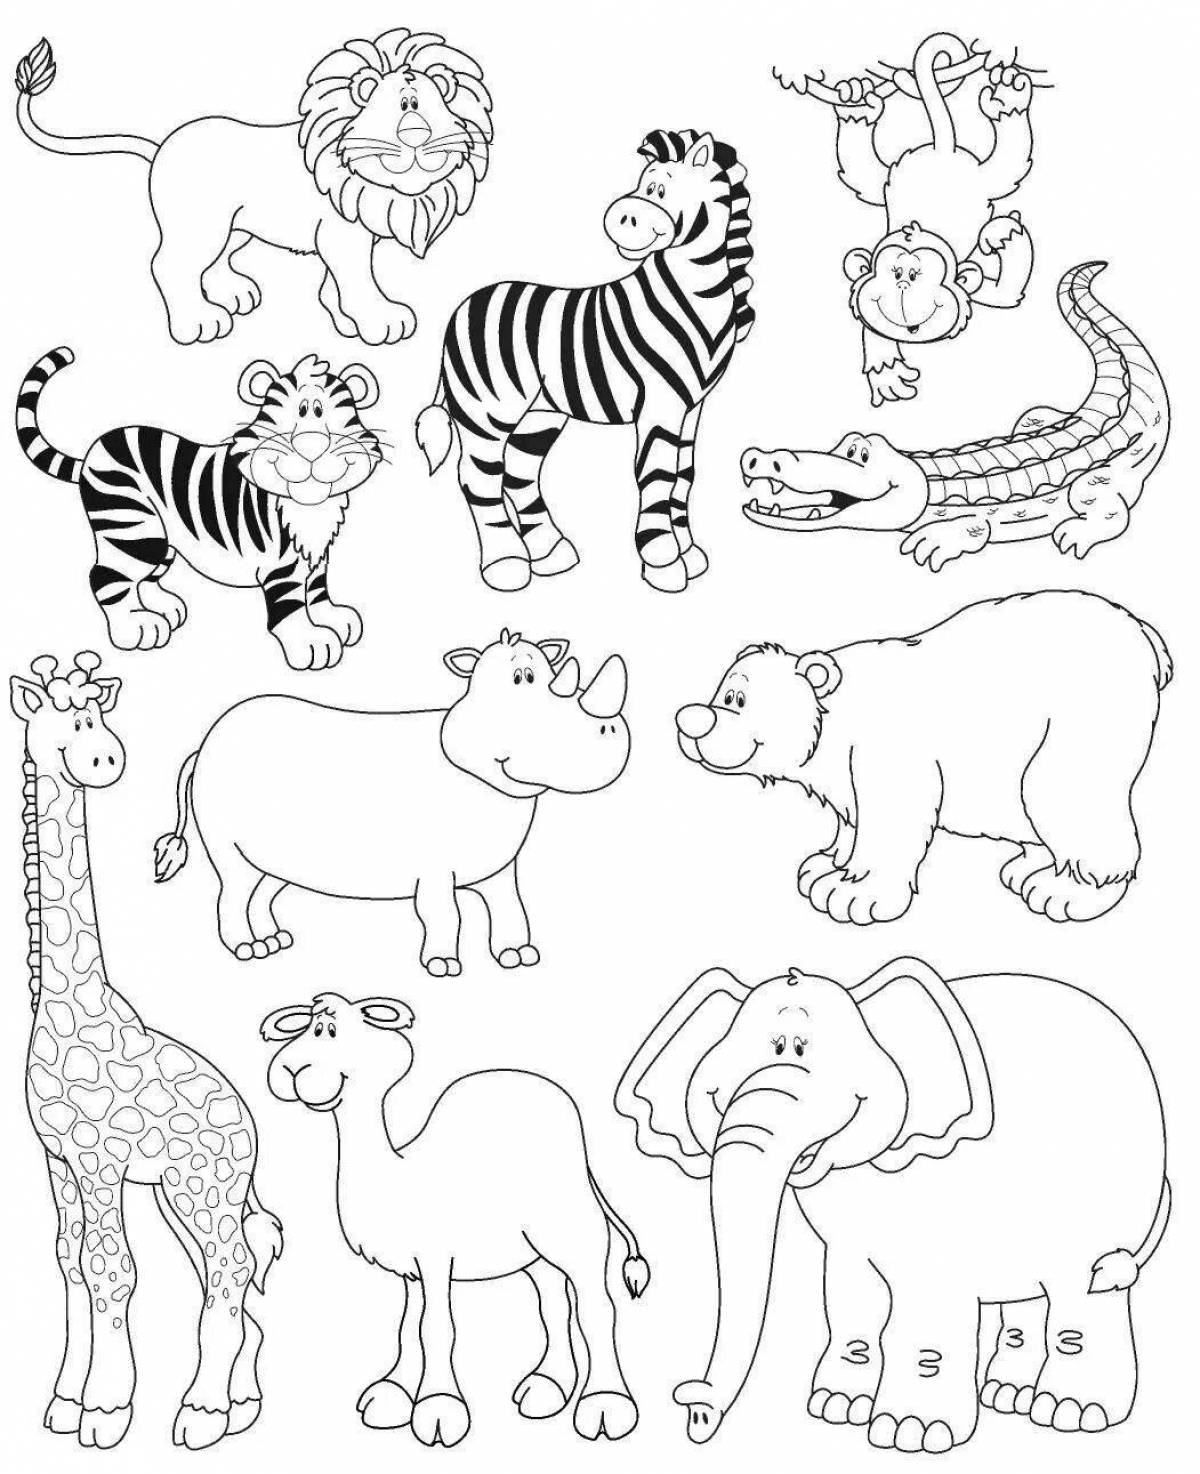 Amazing coloring pages animals grade 1